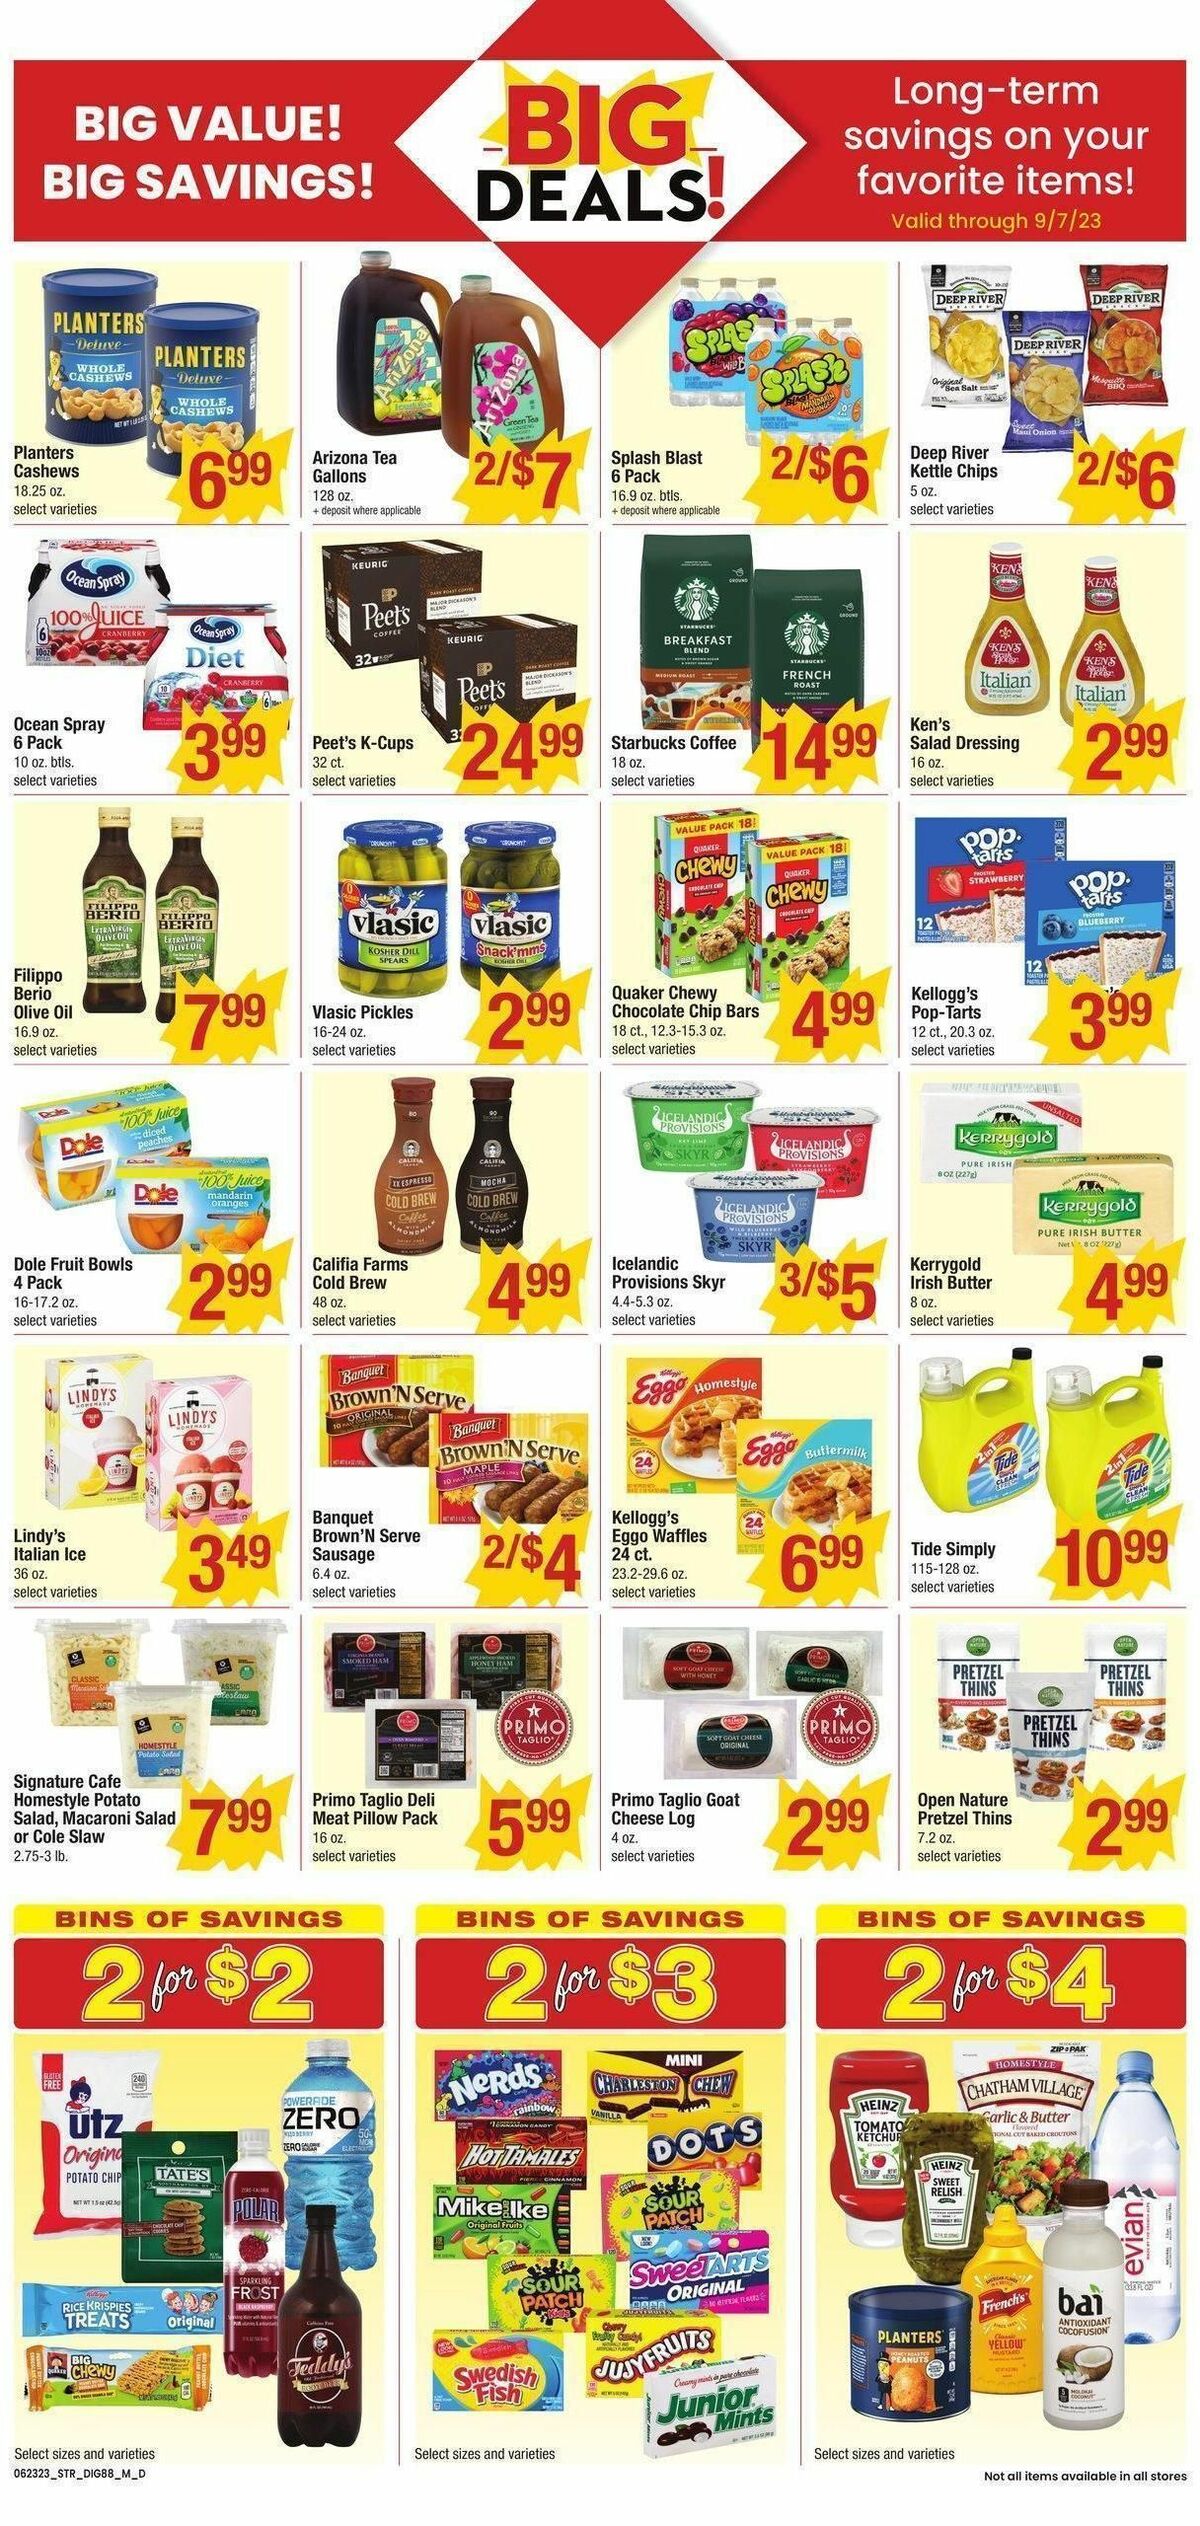 Star Market Weekly Ad from June 23